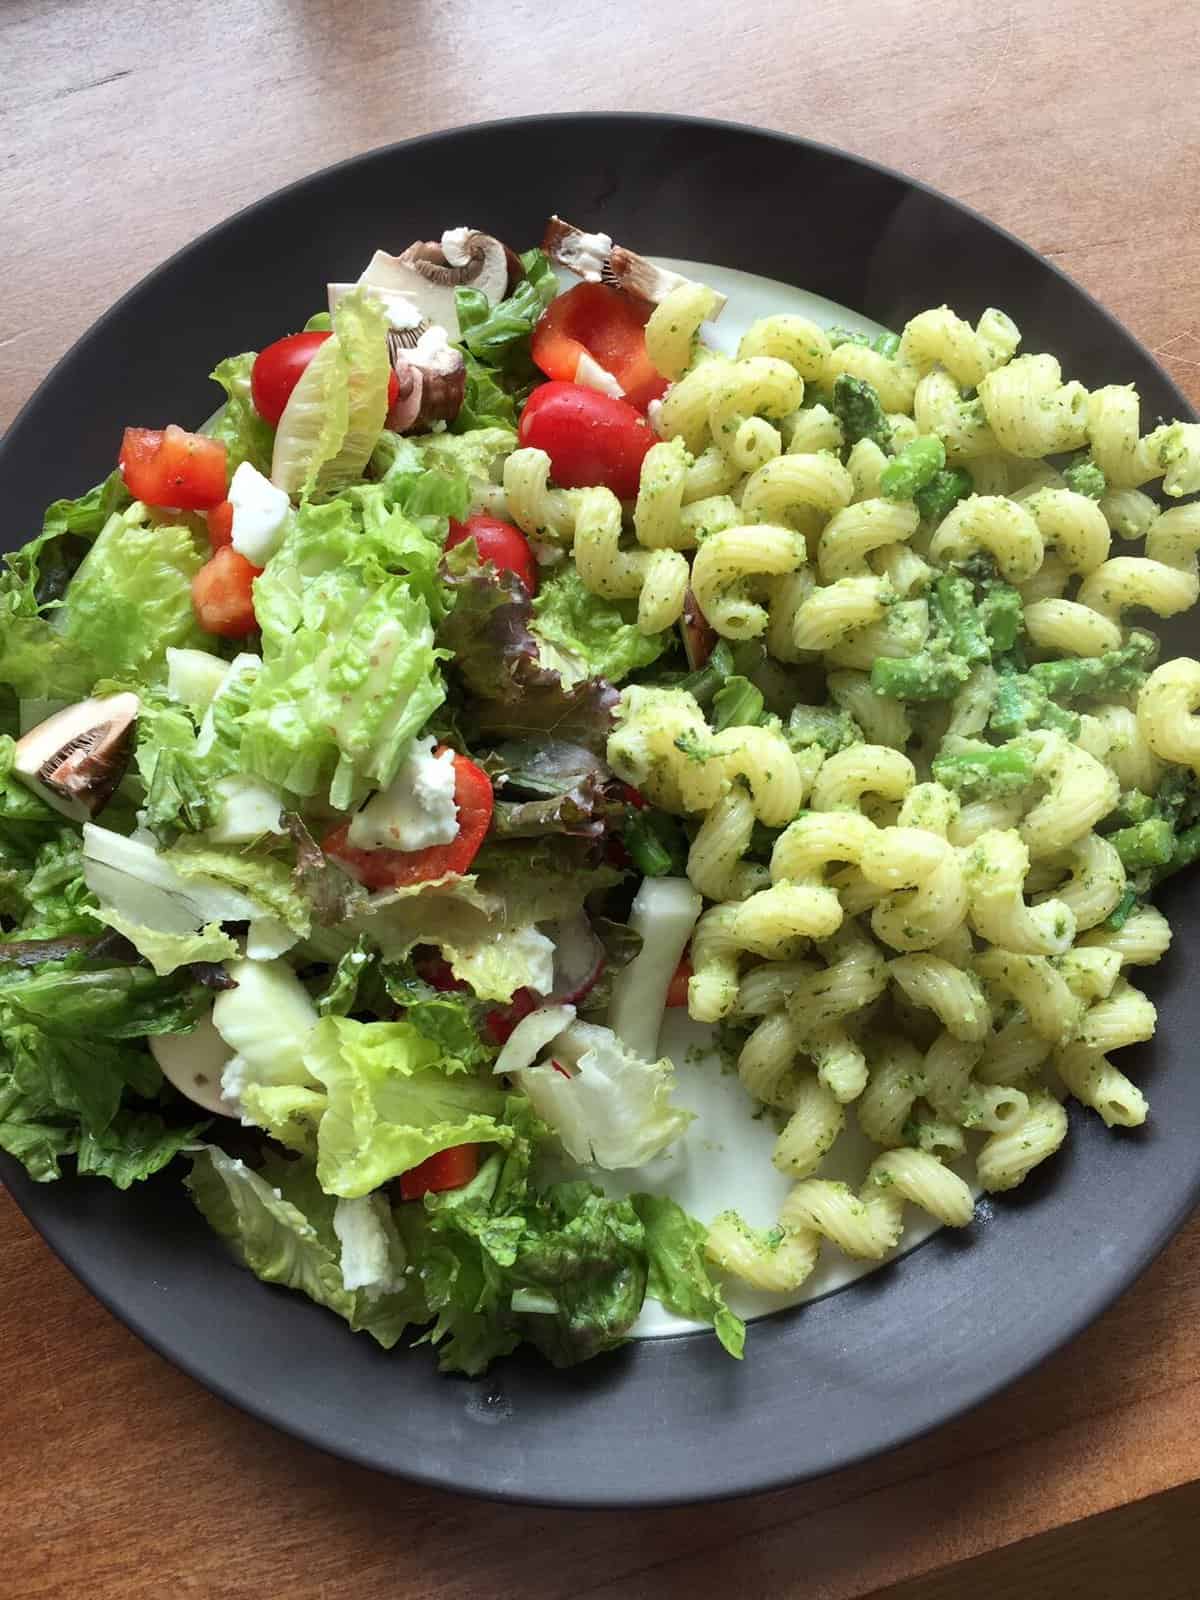 a plate of cavatappi with broccoli pesto and a side salad.